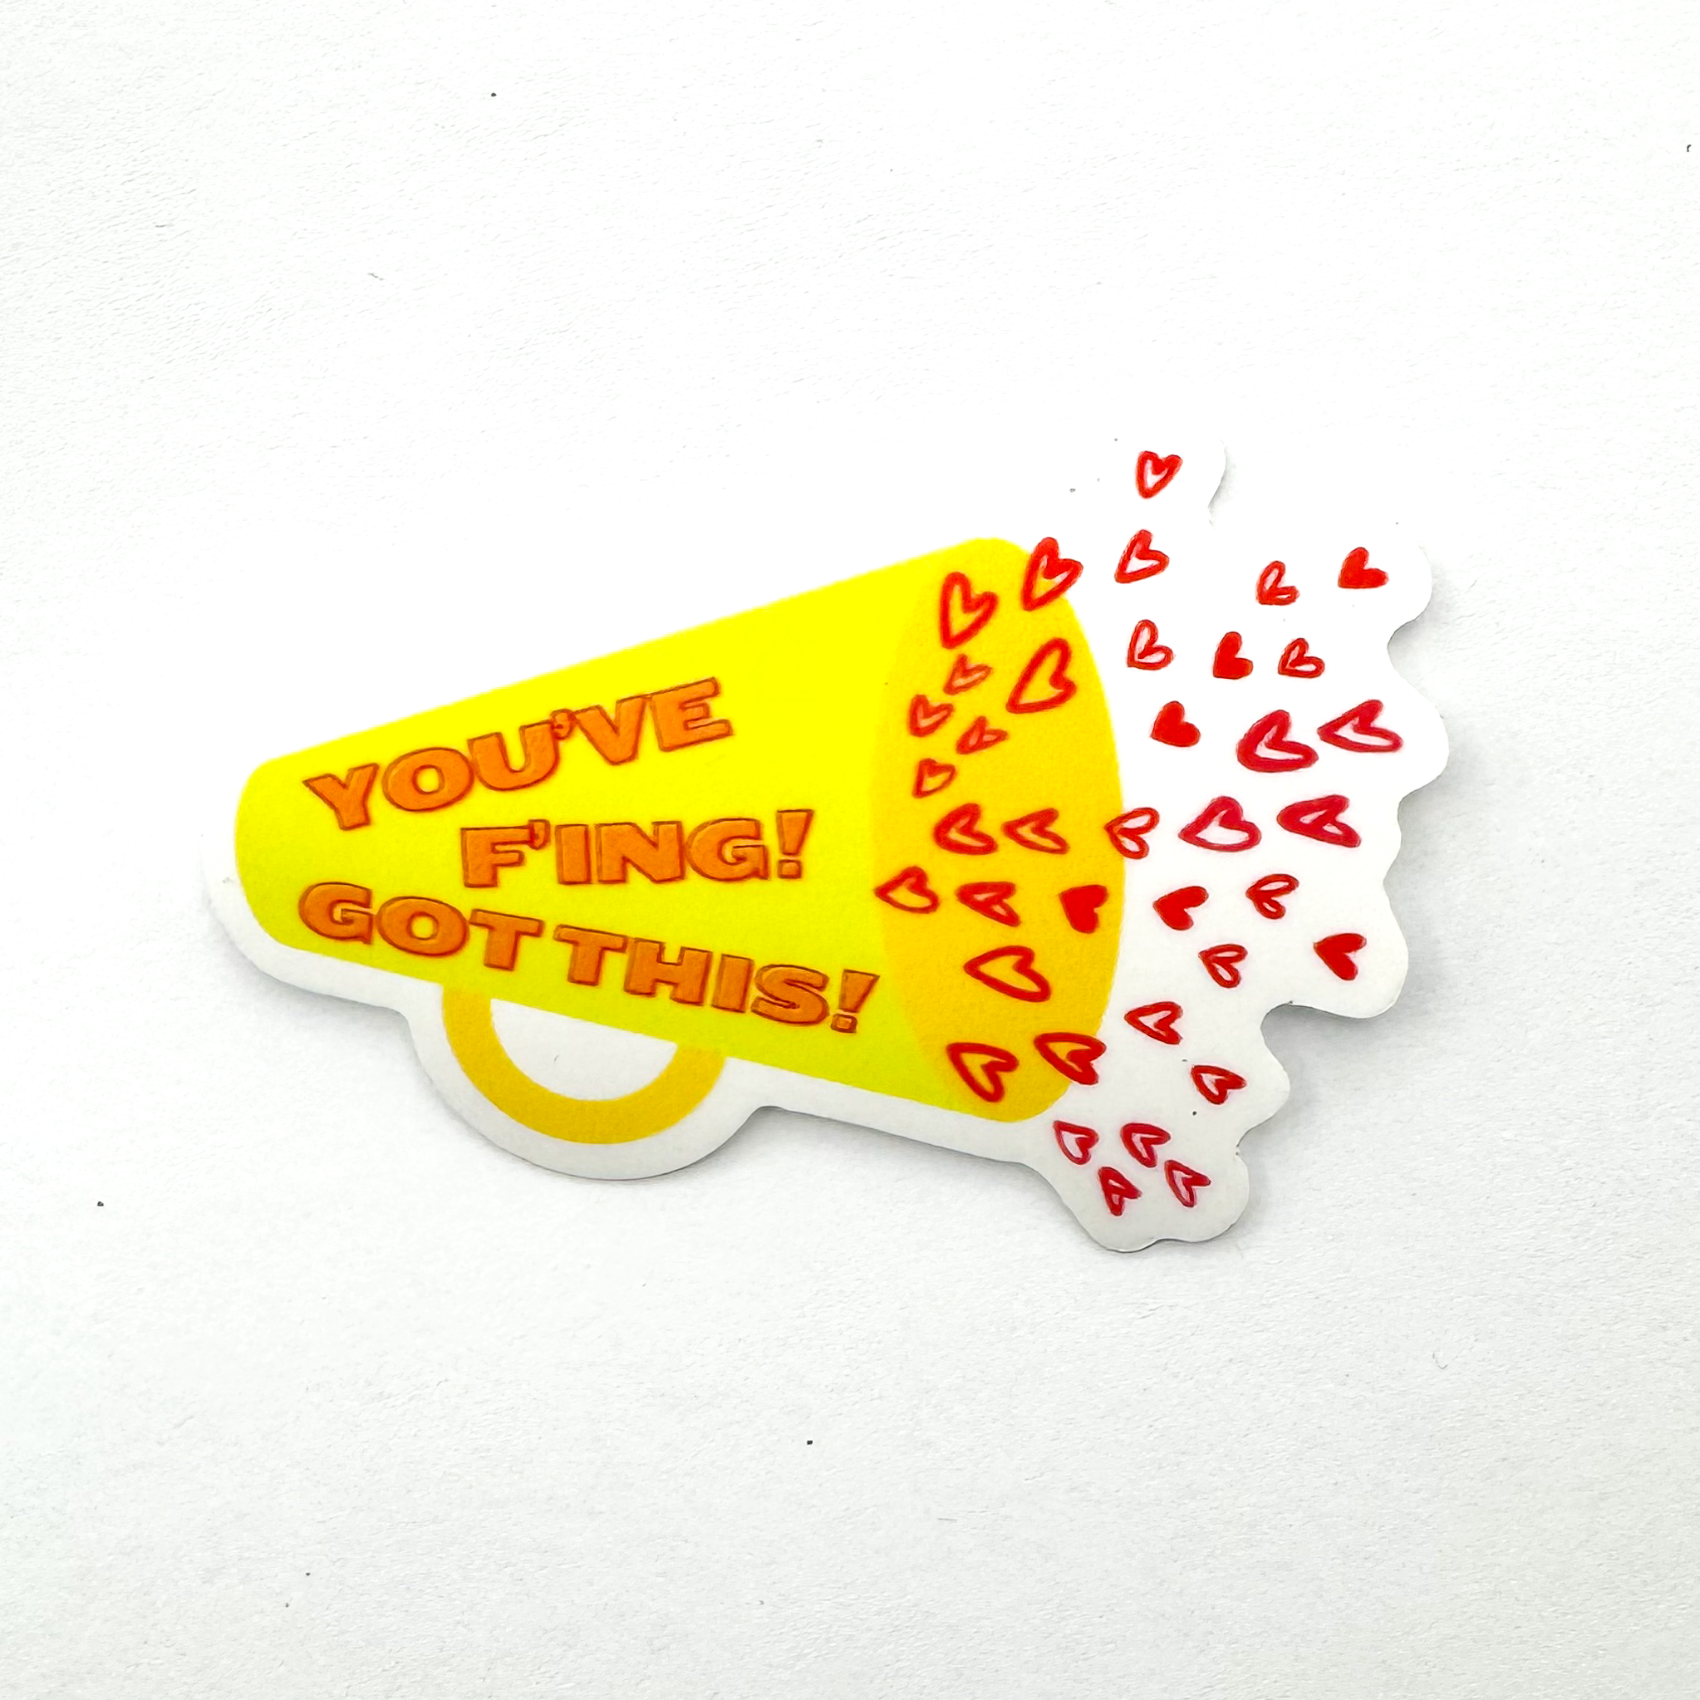 yellow megaphone with cartoon hearts coming out. words on megaphone "you've F'ing got this!" (cute motivational sticker)